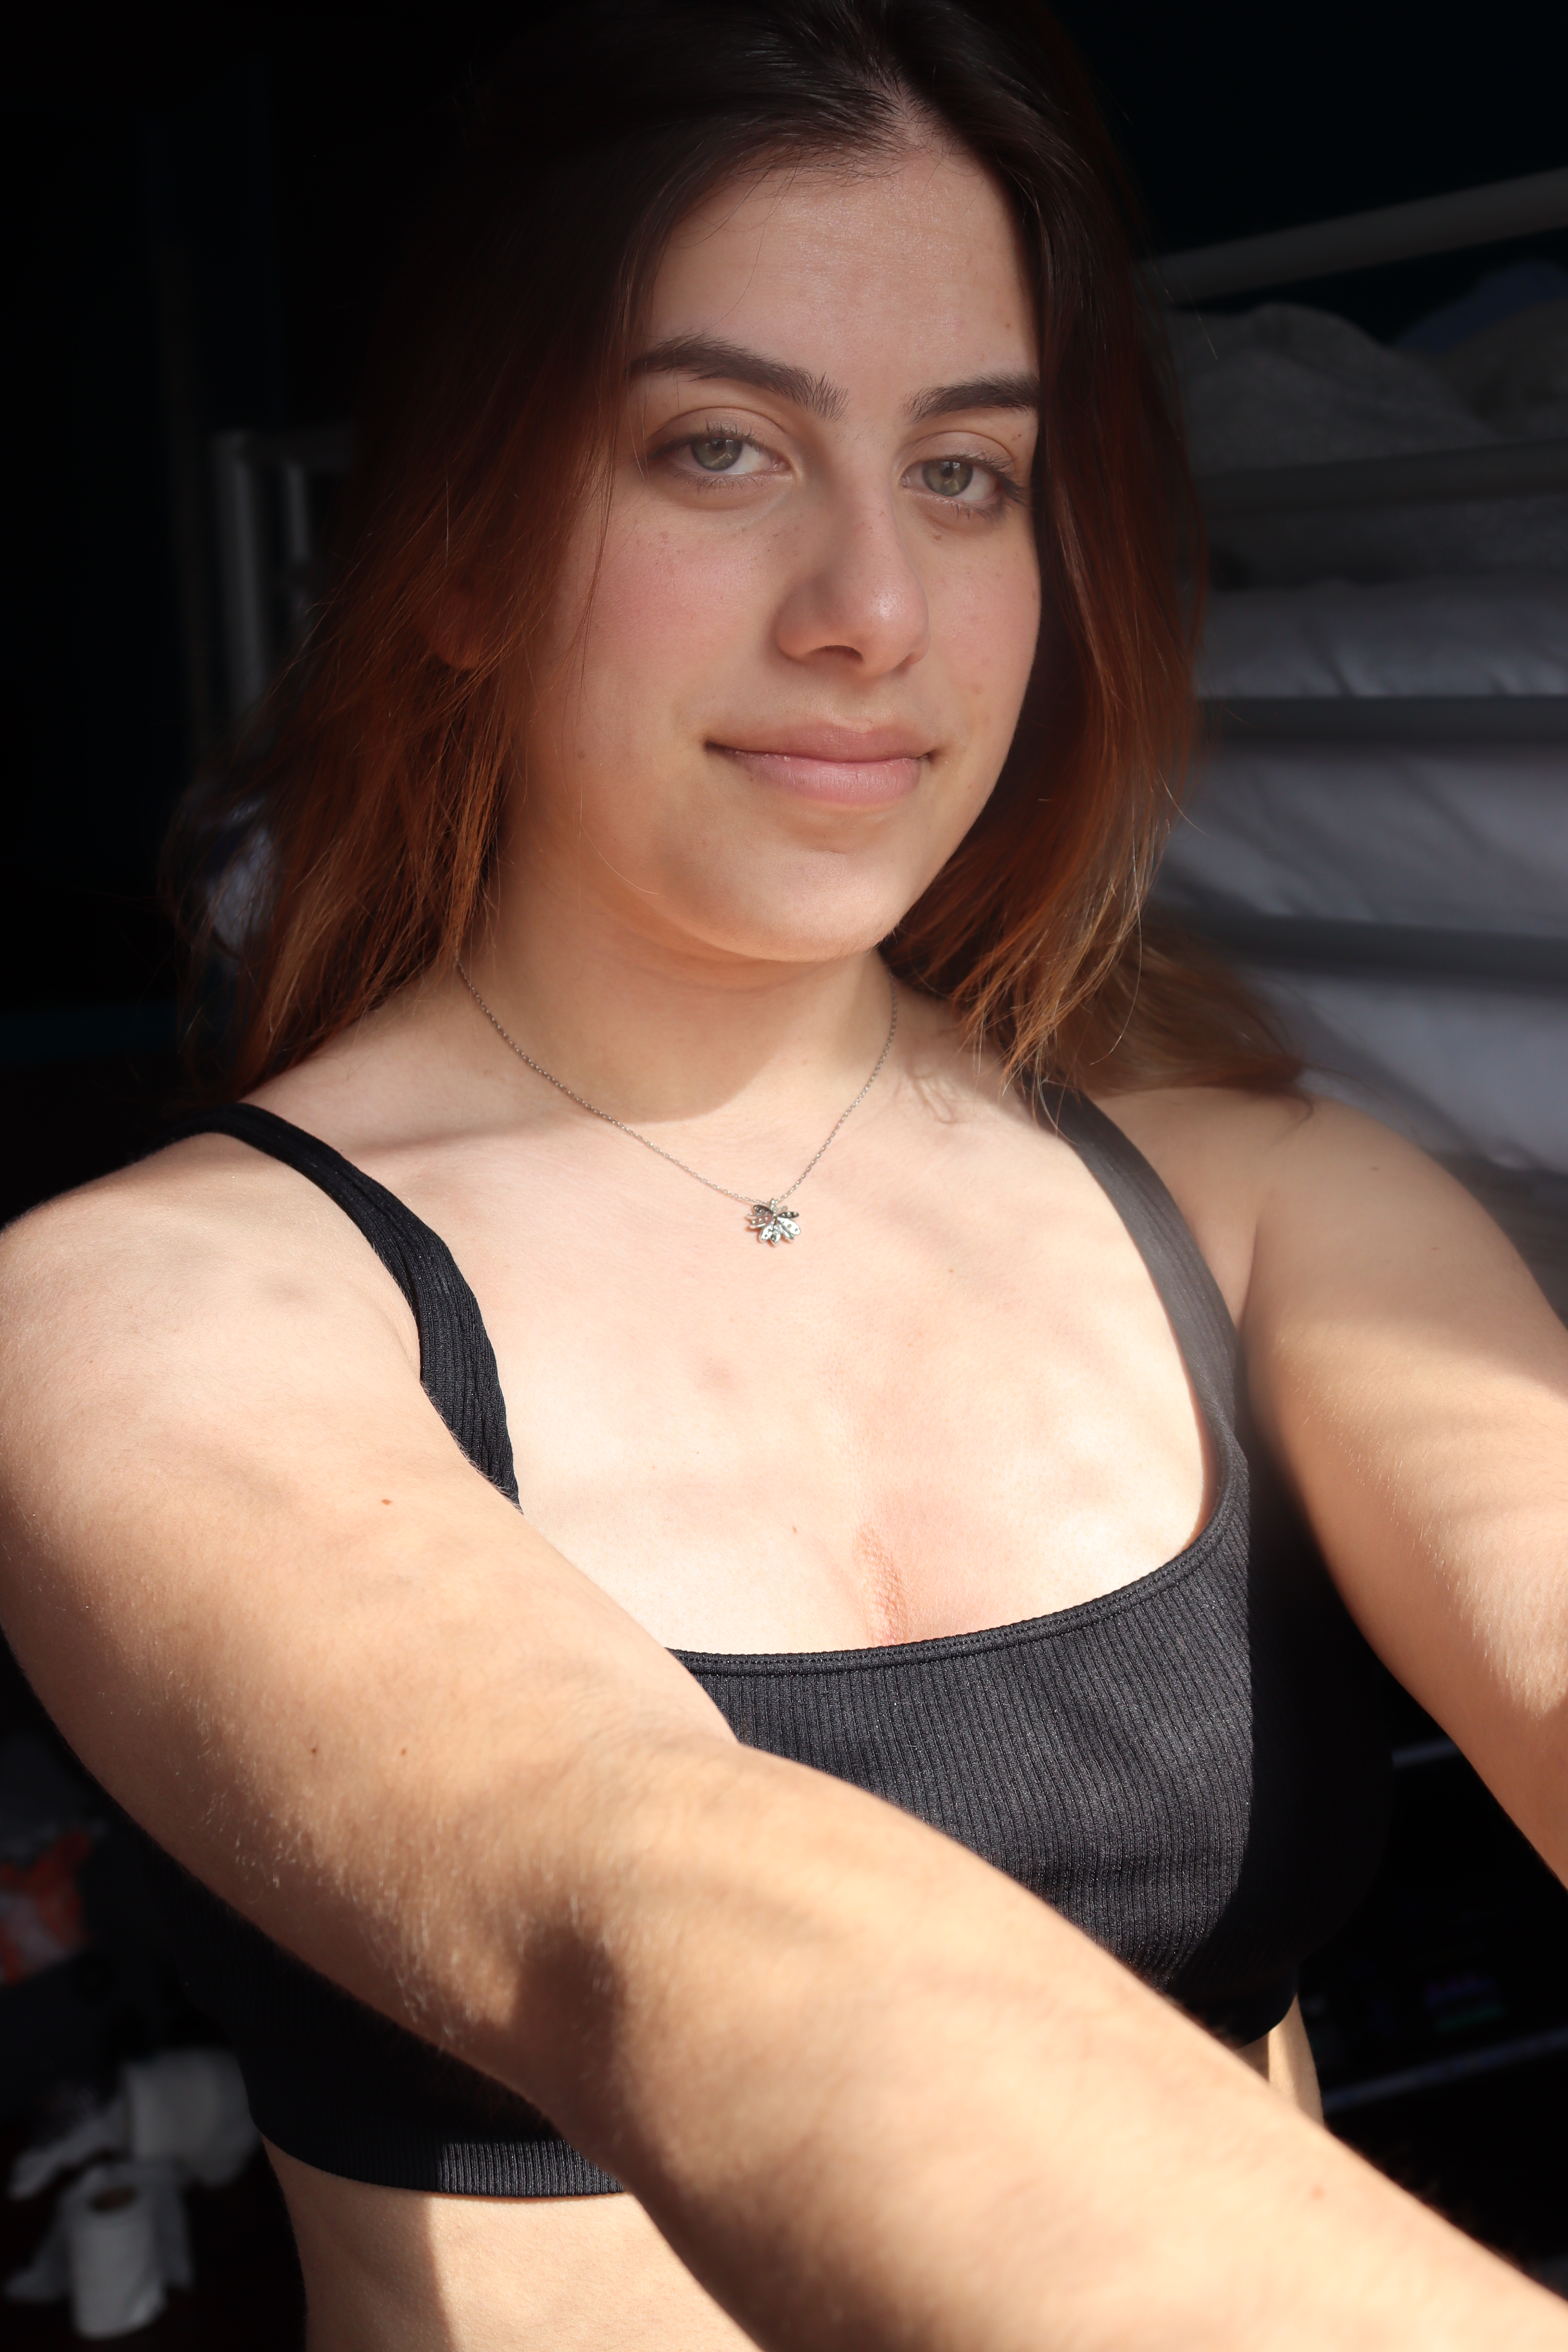 An image of a woman looking at the camera with both arms out.